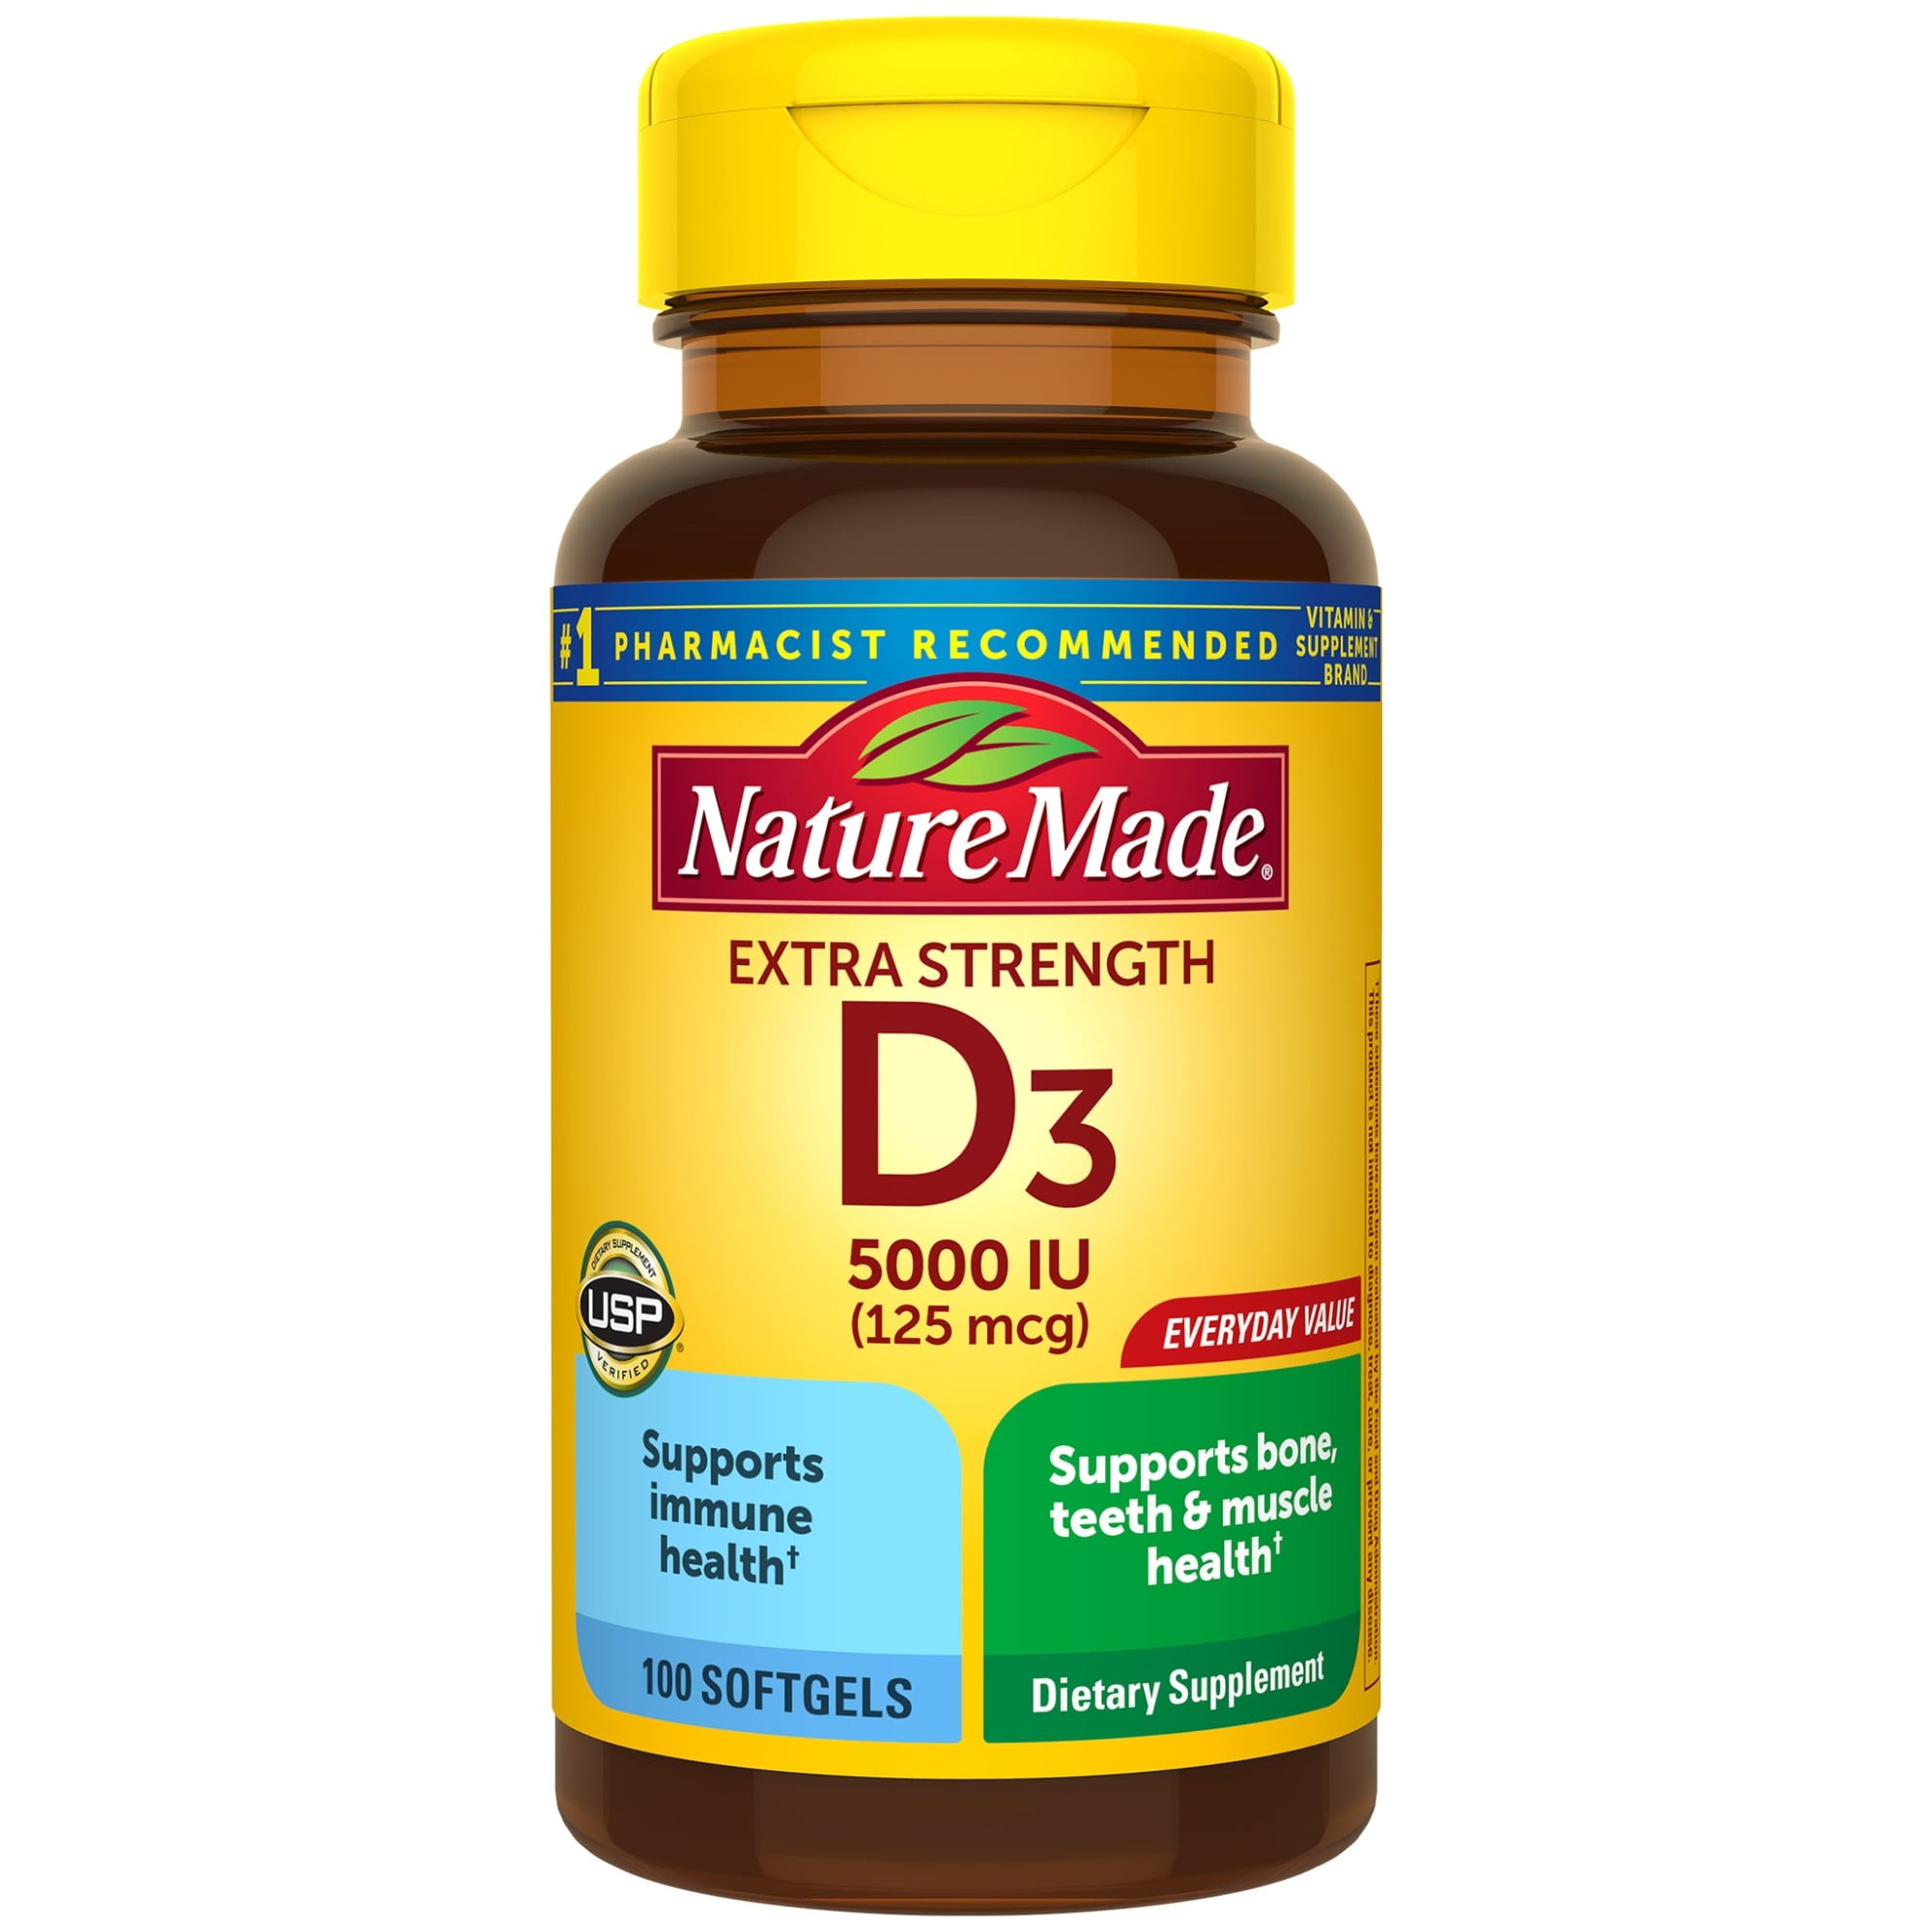 Nature Made Extra Strength Vitamin D3 5000 Iu 125 Mcg 100 Softgels High Potency Vitamin D Helps Support Immune Health Strong Bones And Teeth Muscle Function Walmart Com Walmart Com